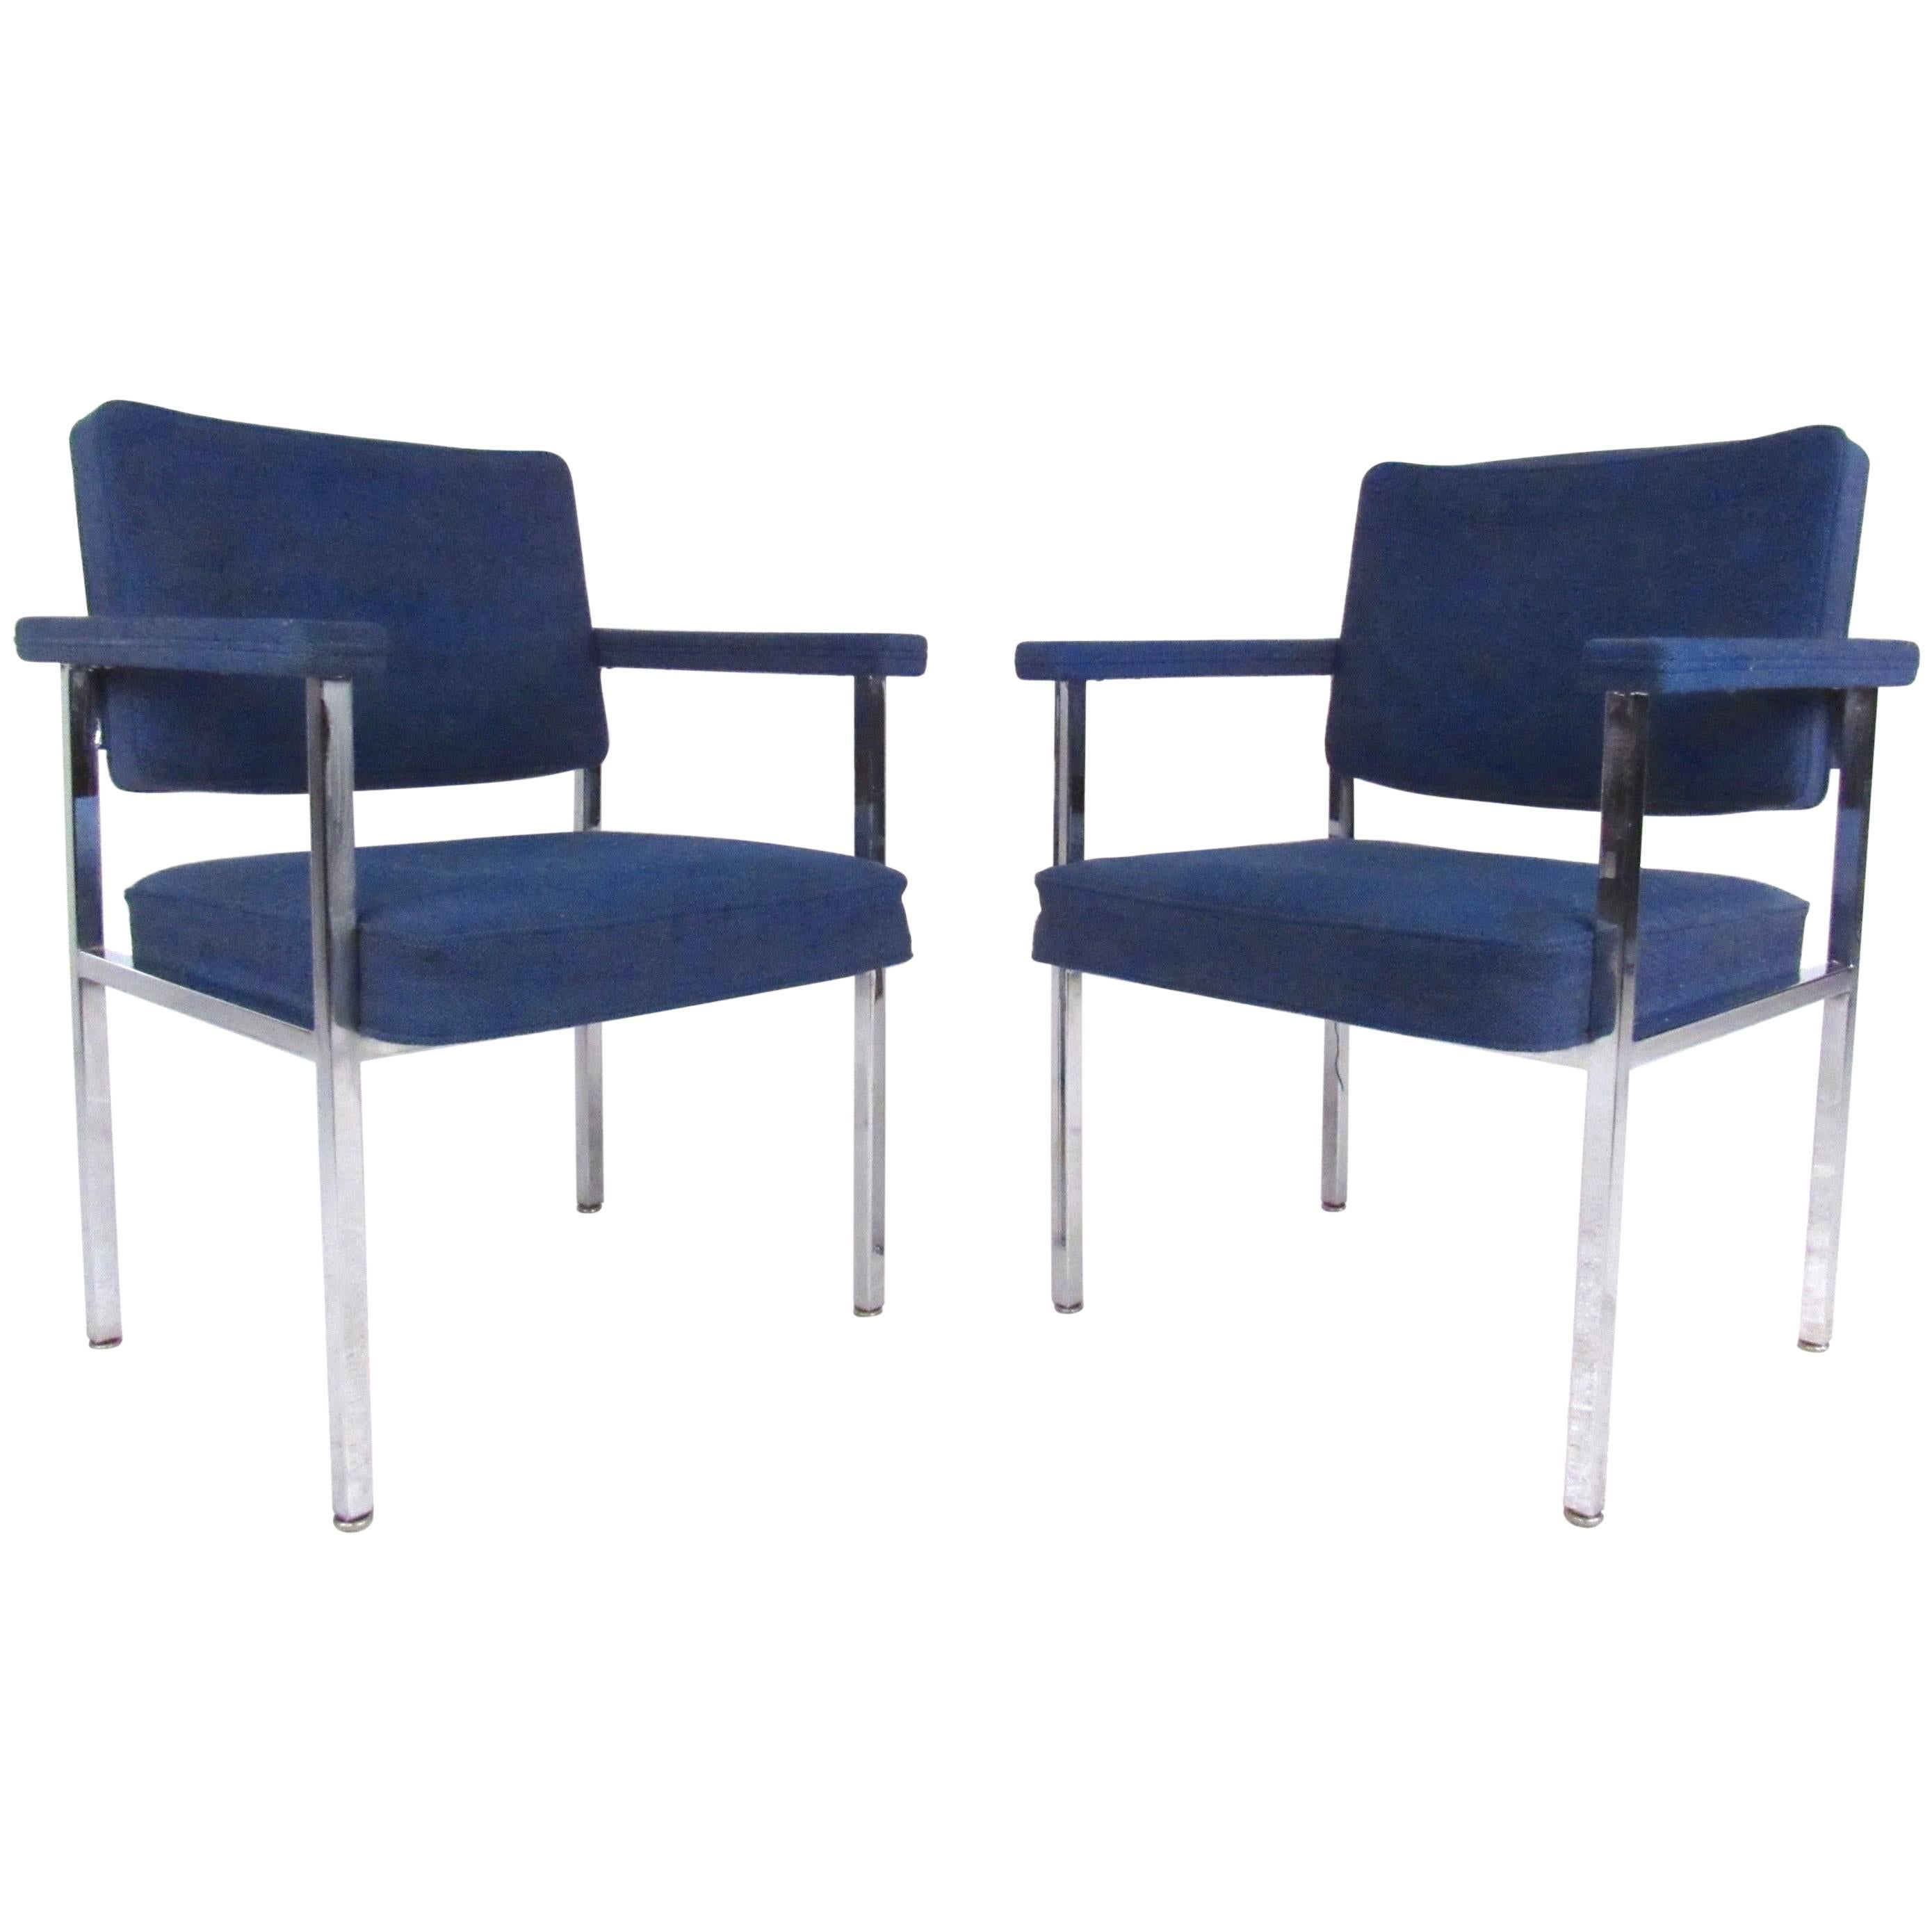 Pair of Mid-Century Modern Chrome Armchairs For Sale